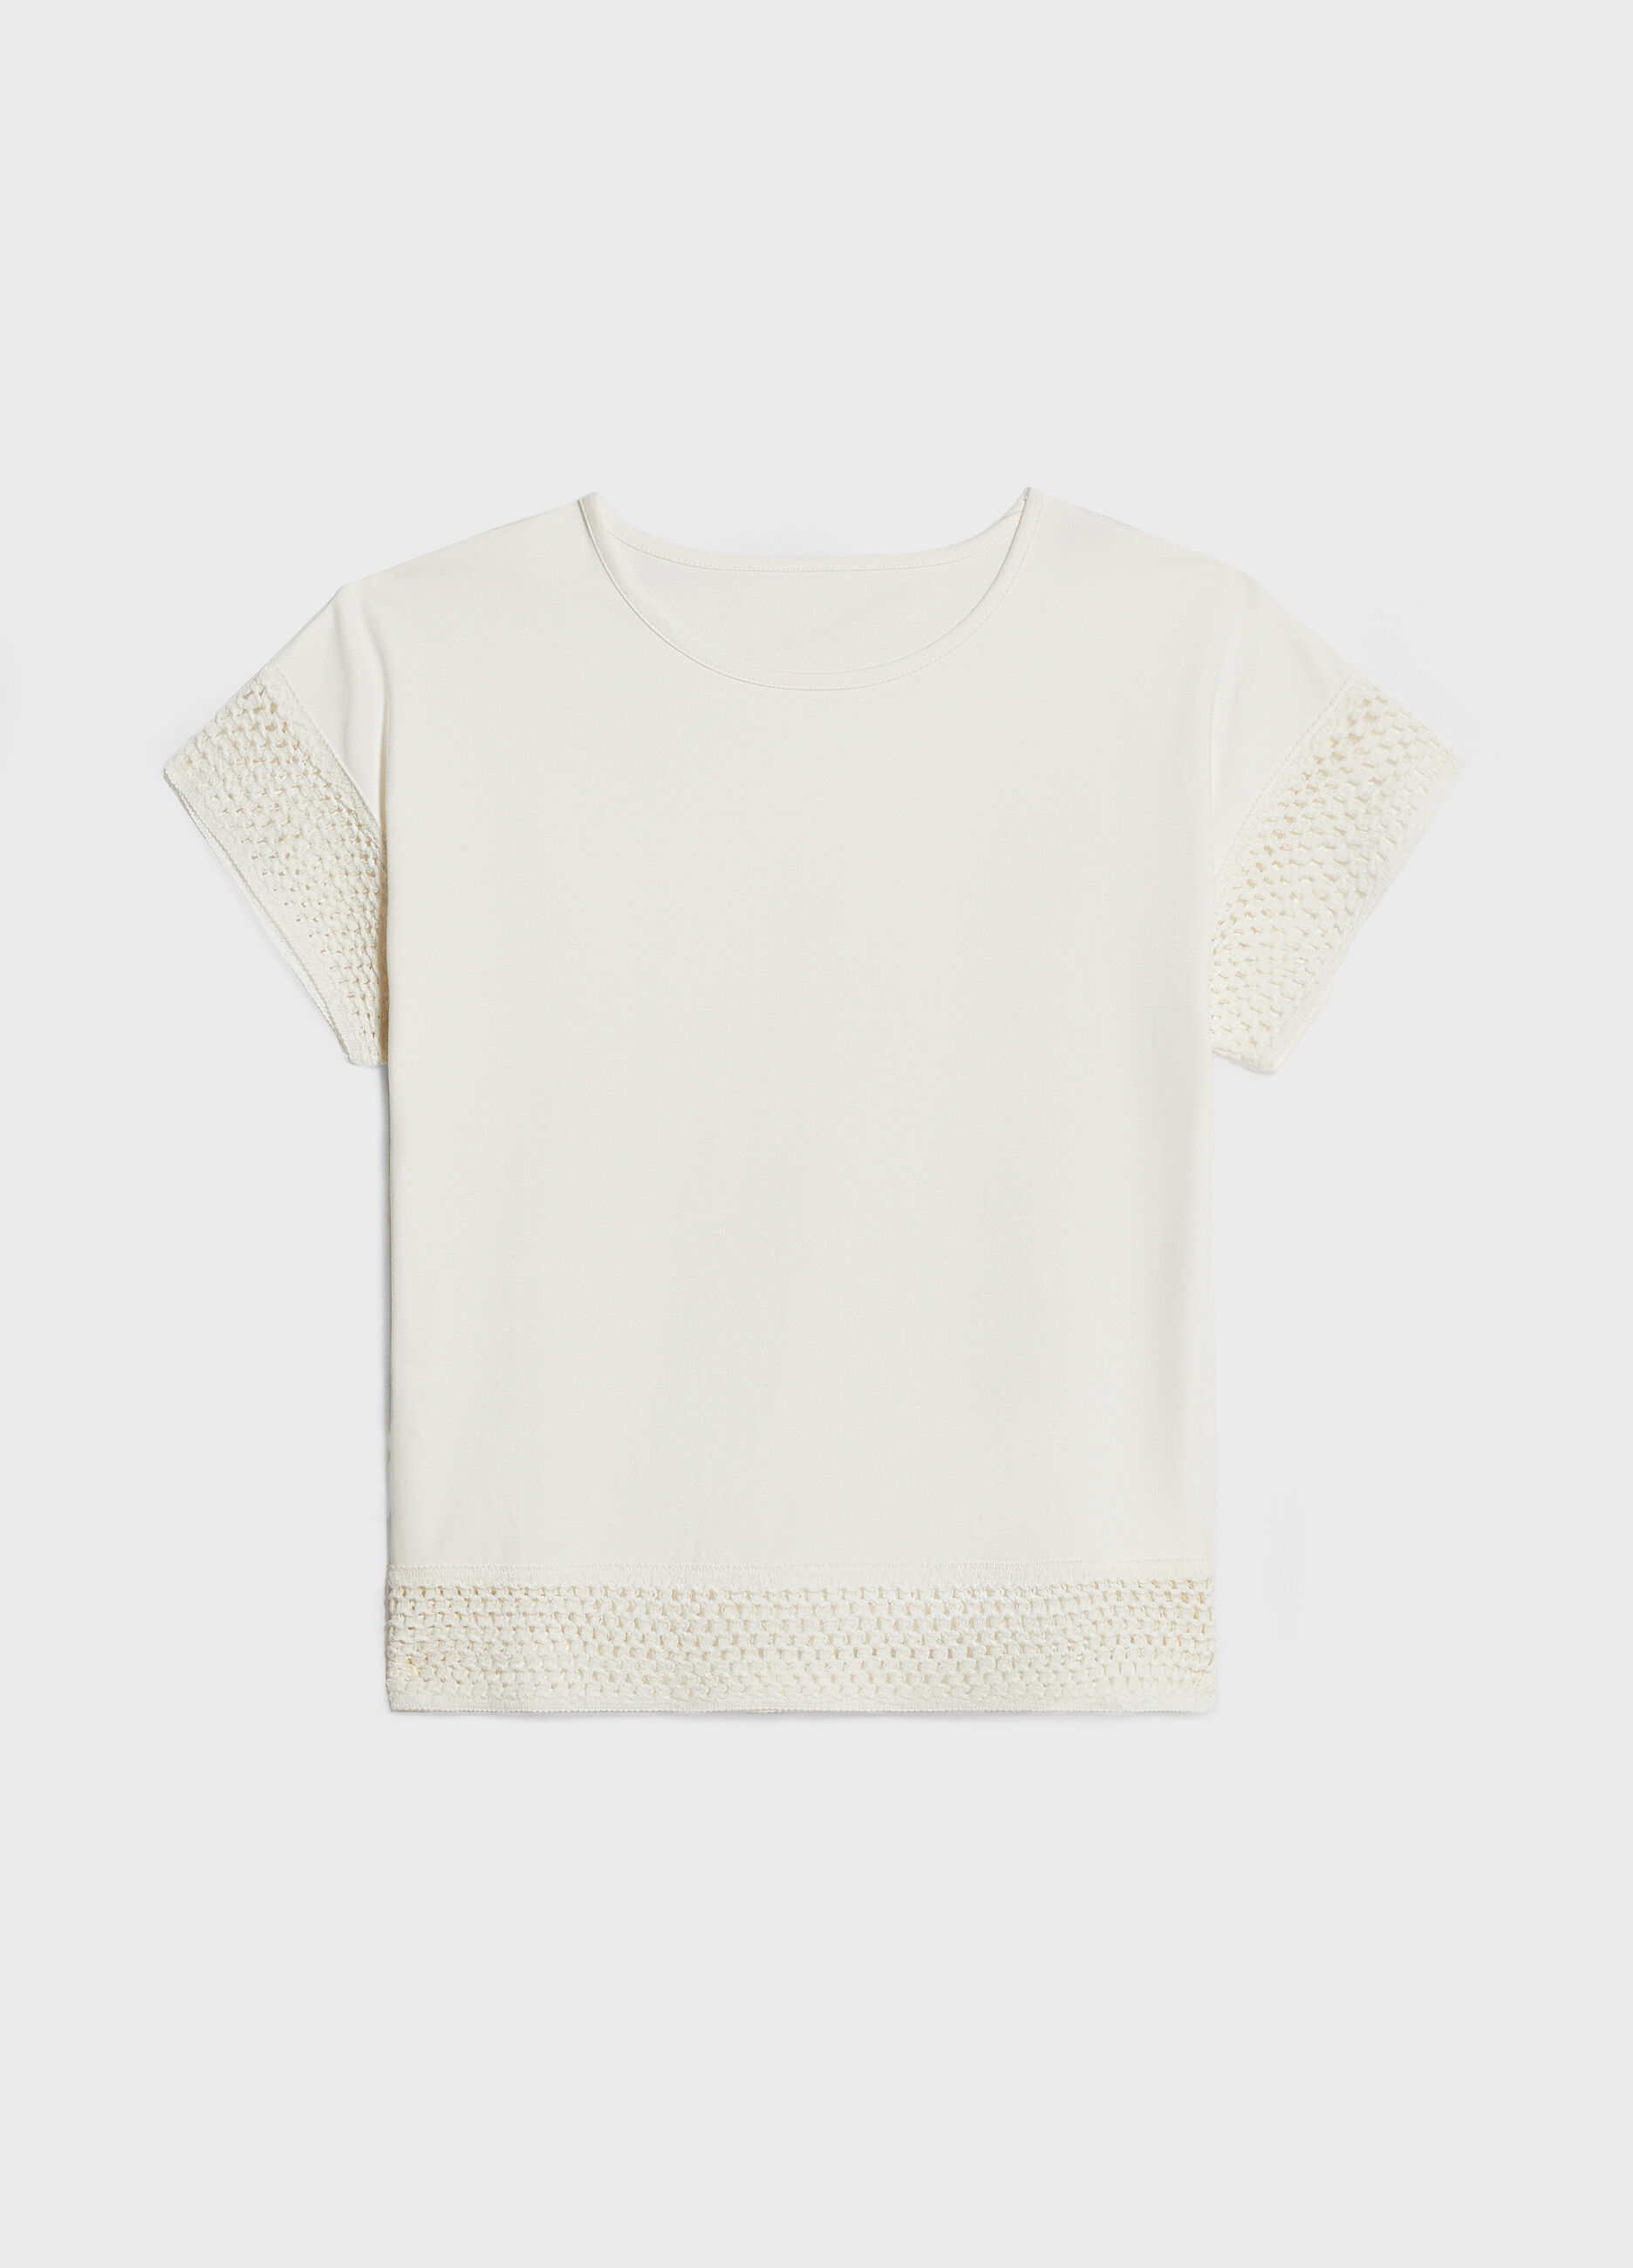 T-shirt with mesh inserts